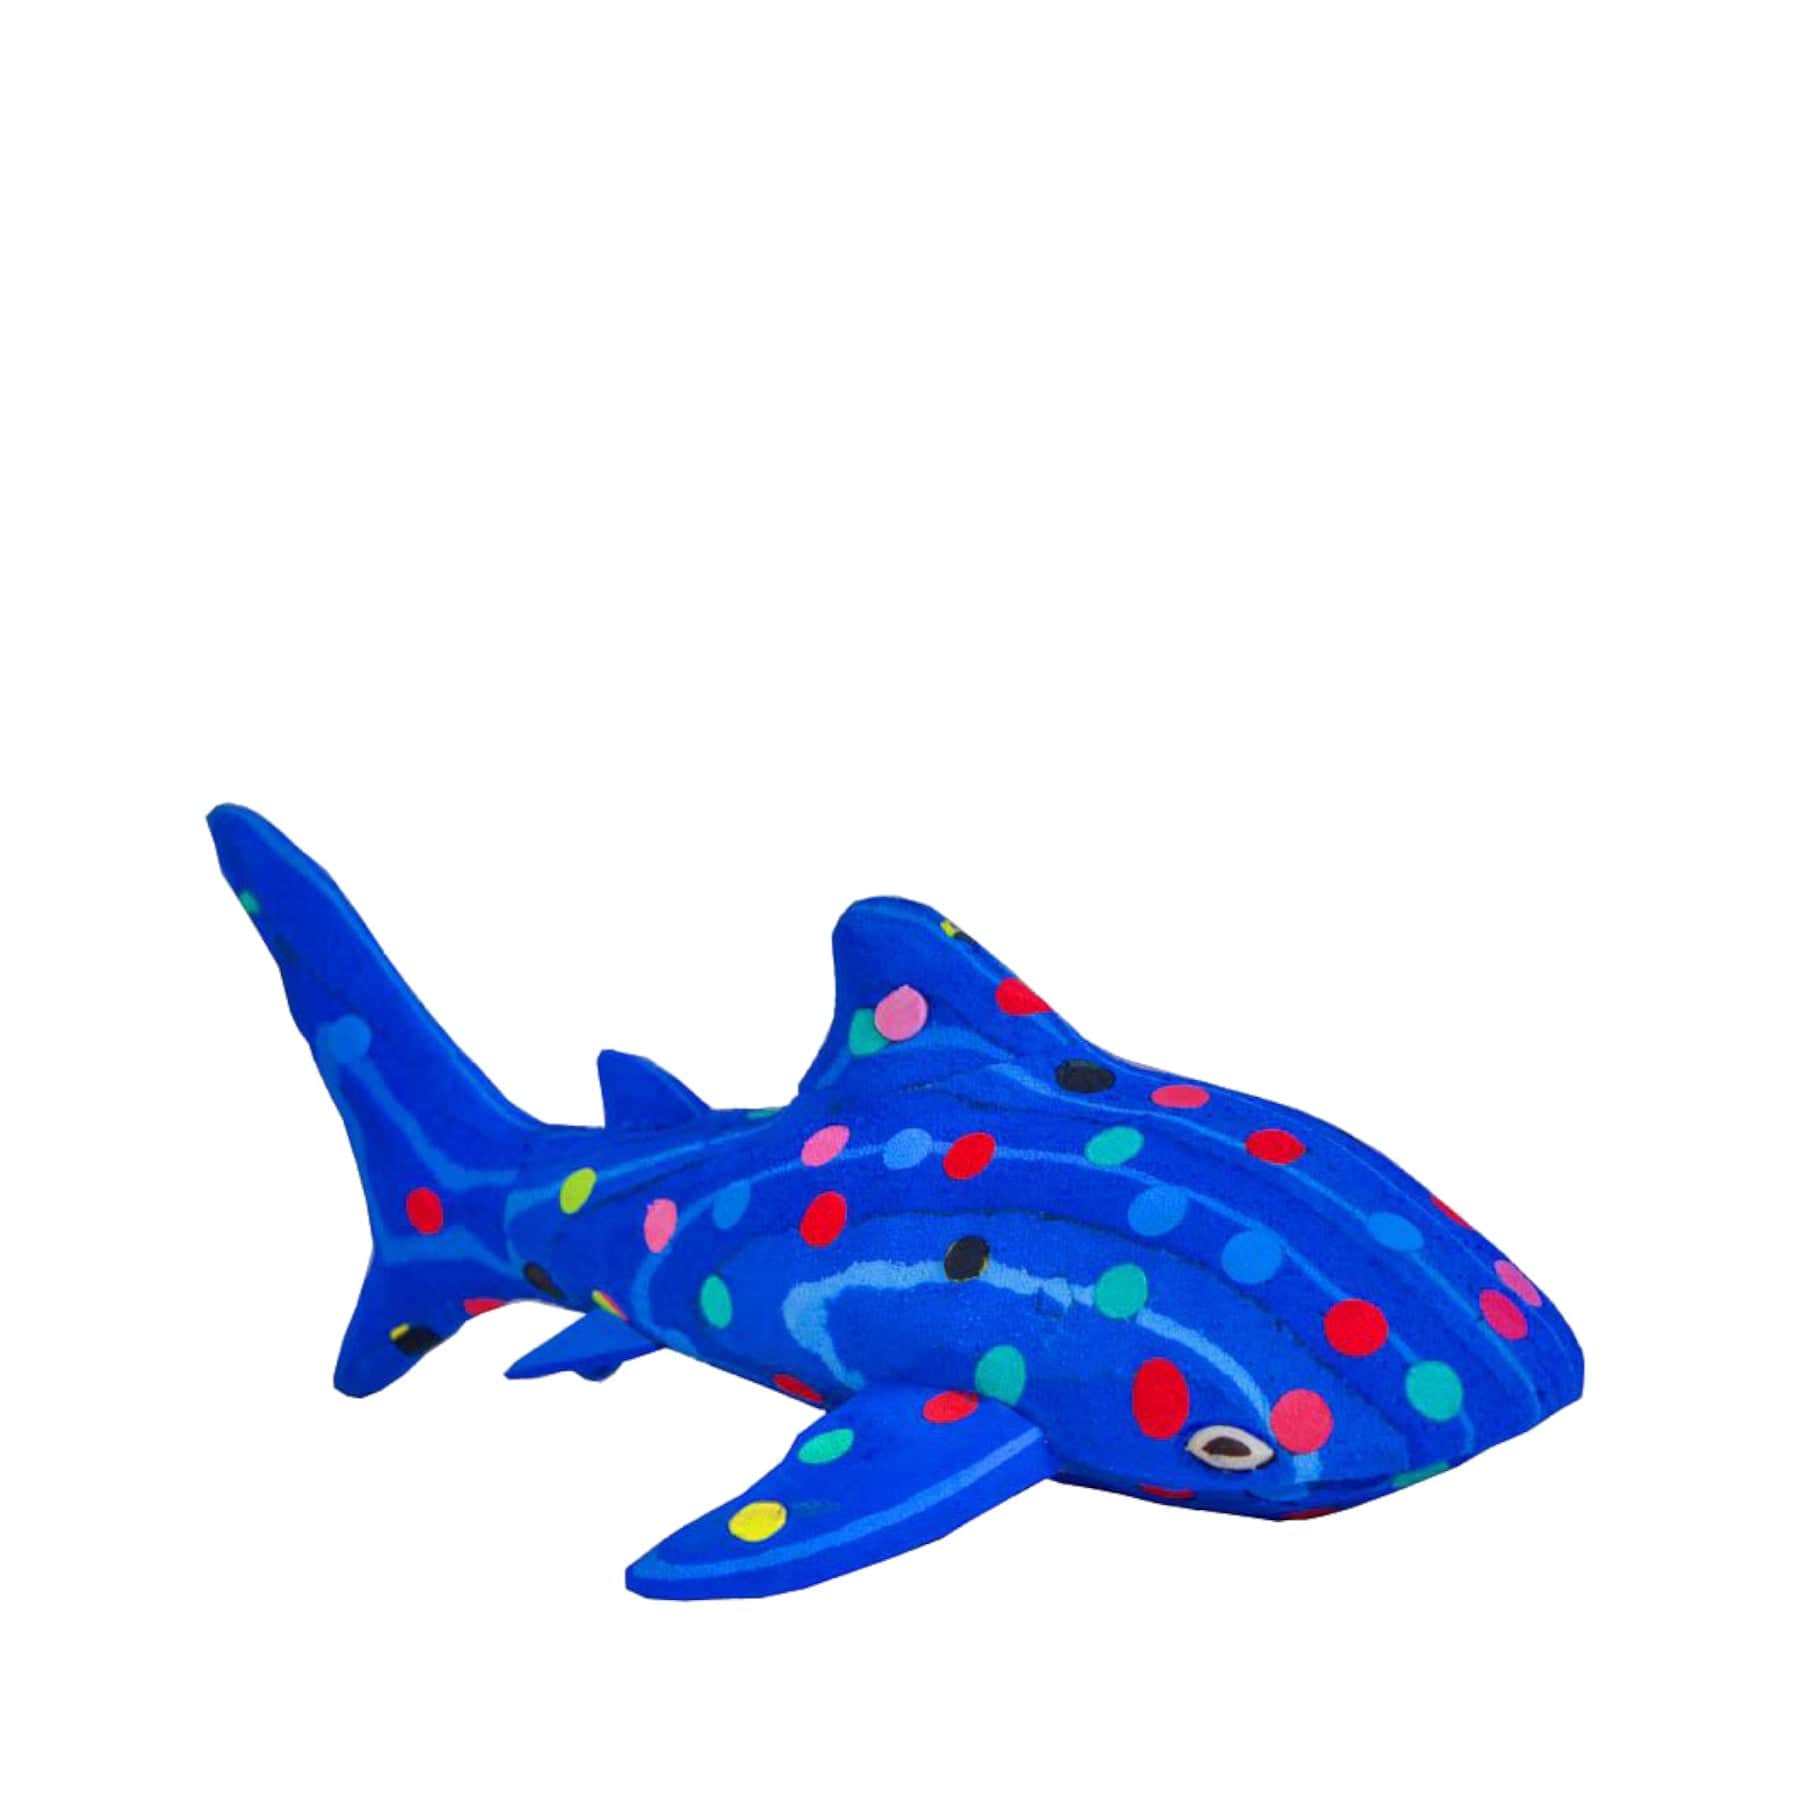 Blue plush shark toy with colorful polka dots isolated on white background